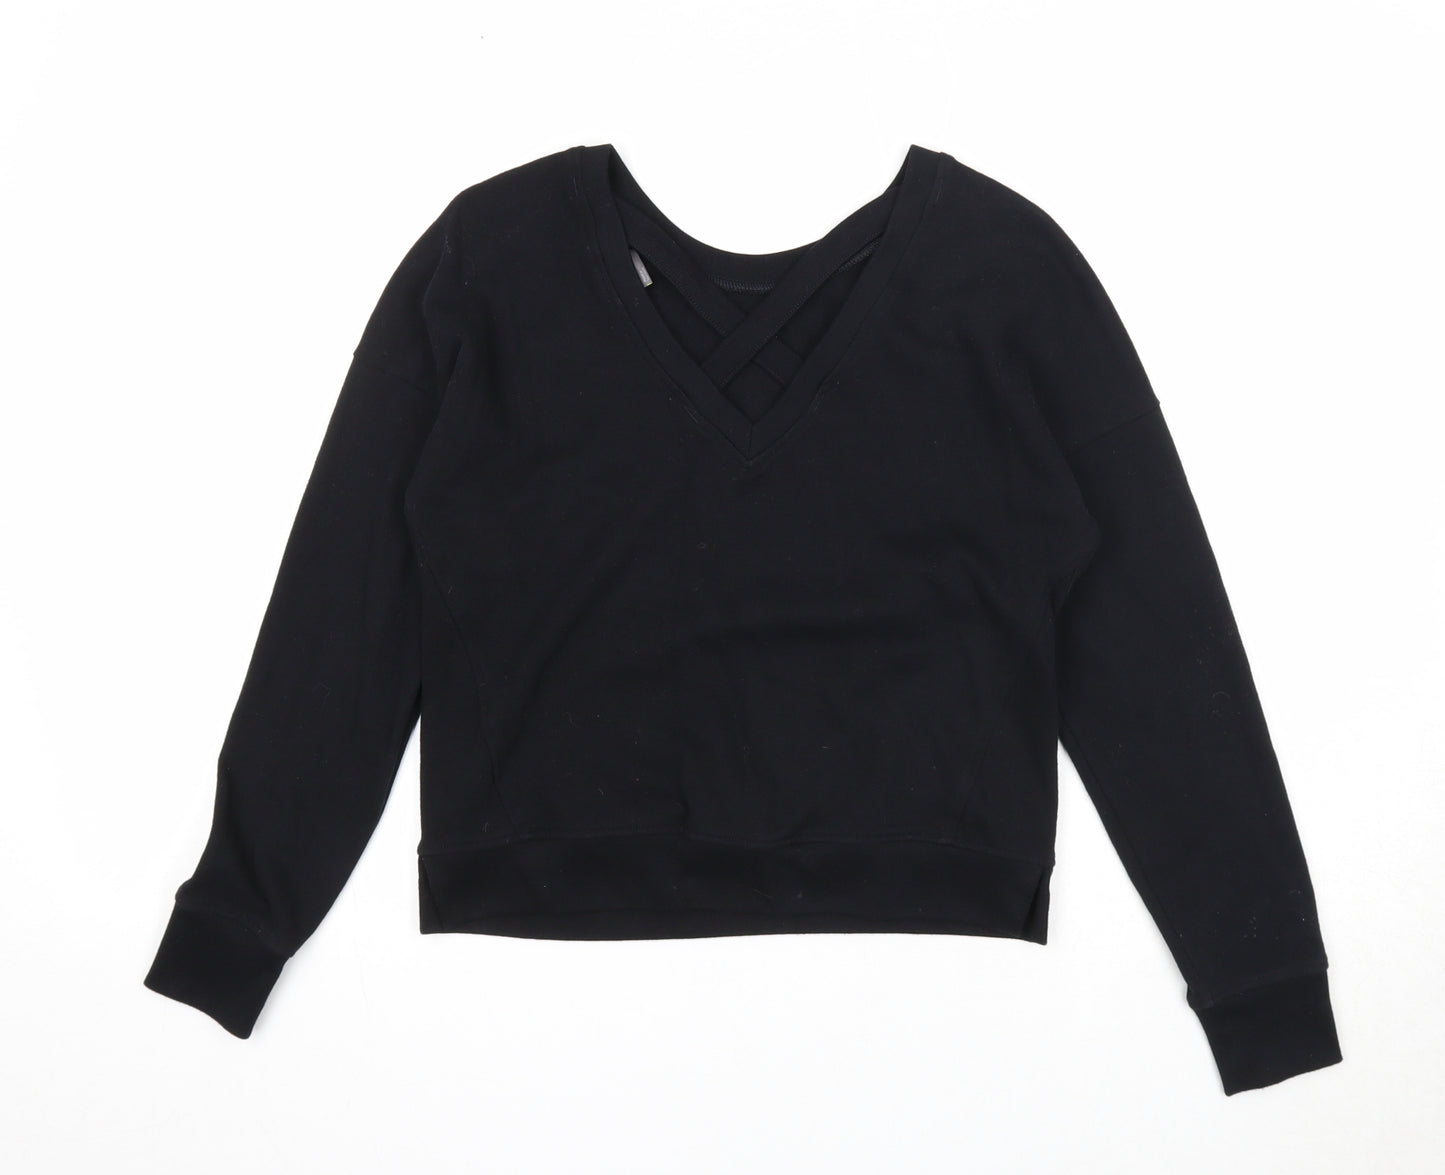 Old navy active Womens Black Cotton Pullover Sweatshirt Size 10 Pullover - Shine Bright Size 10-12